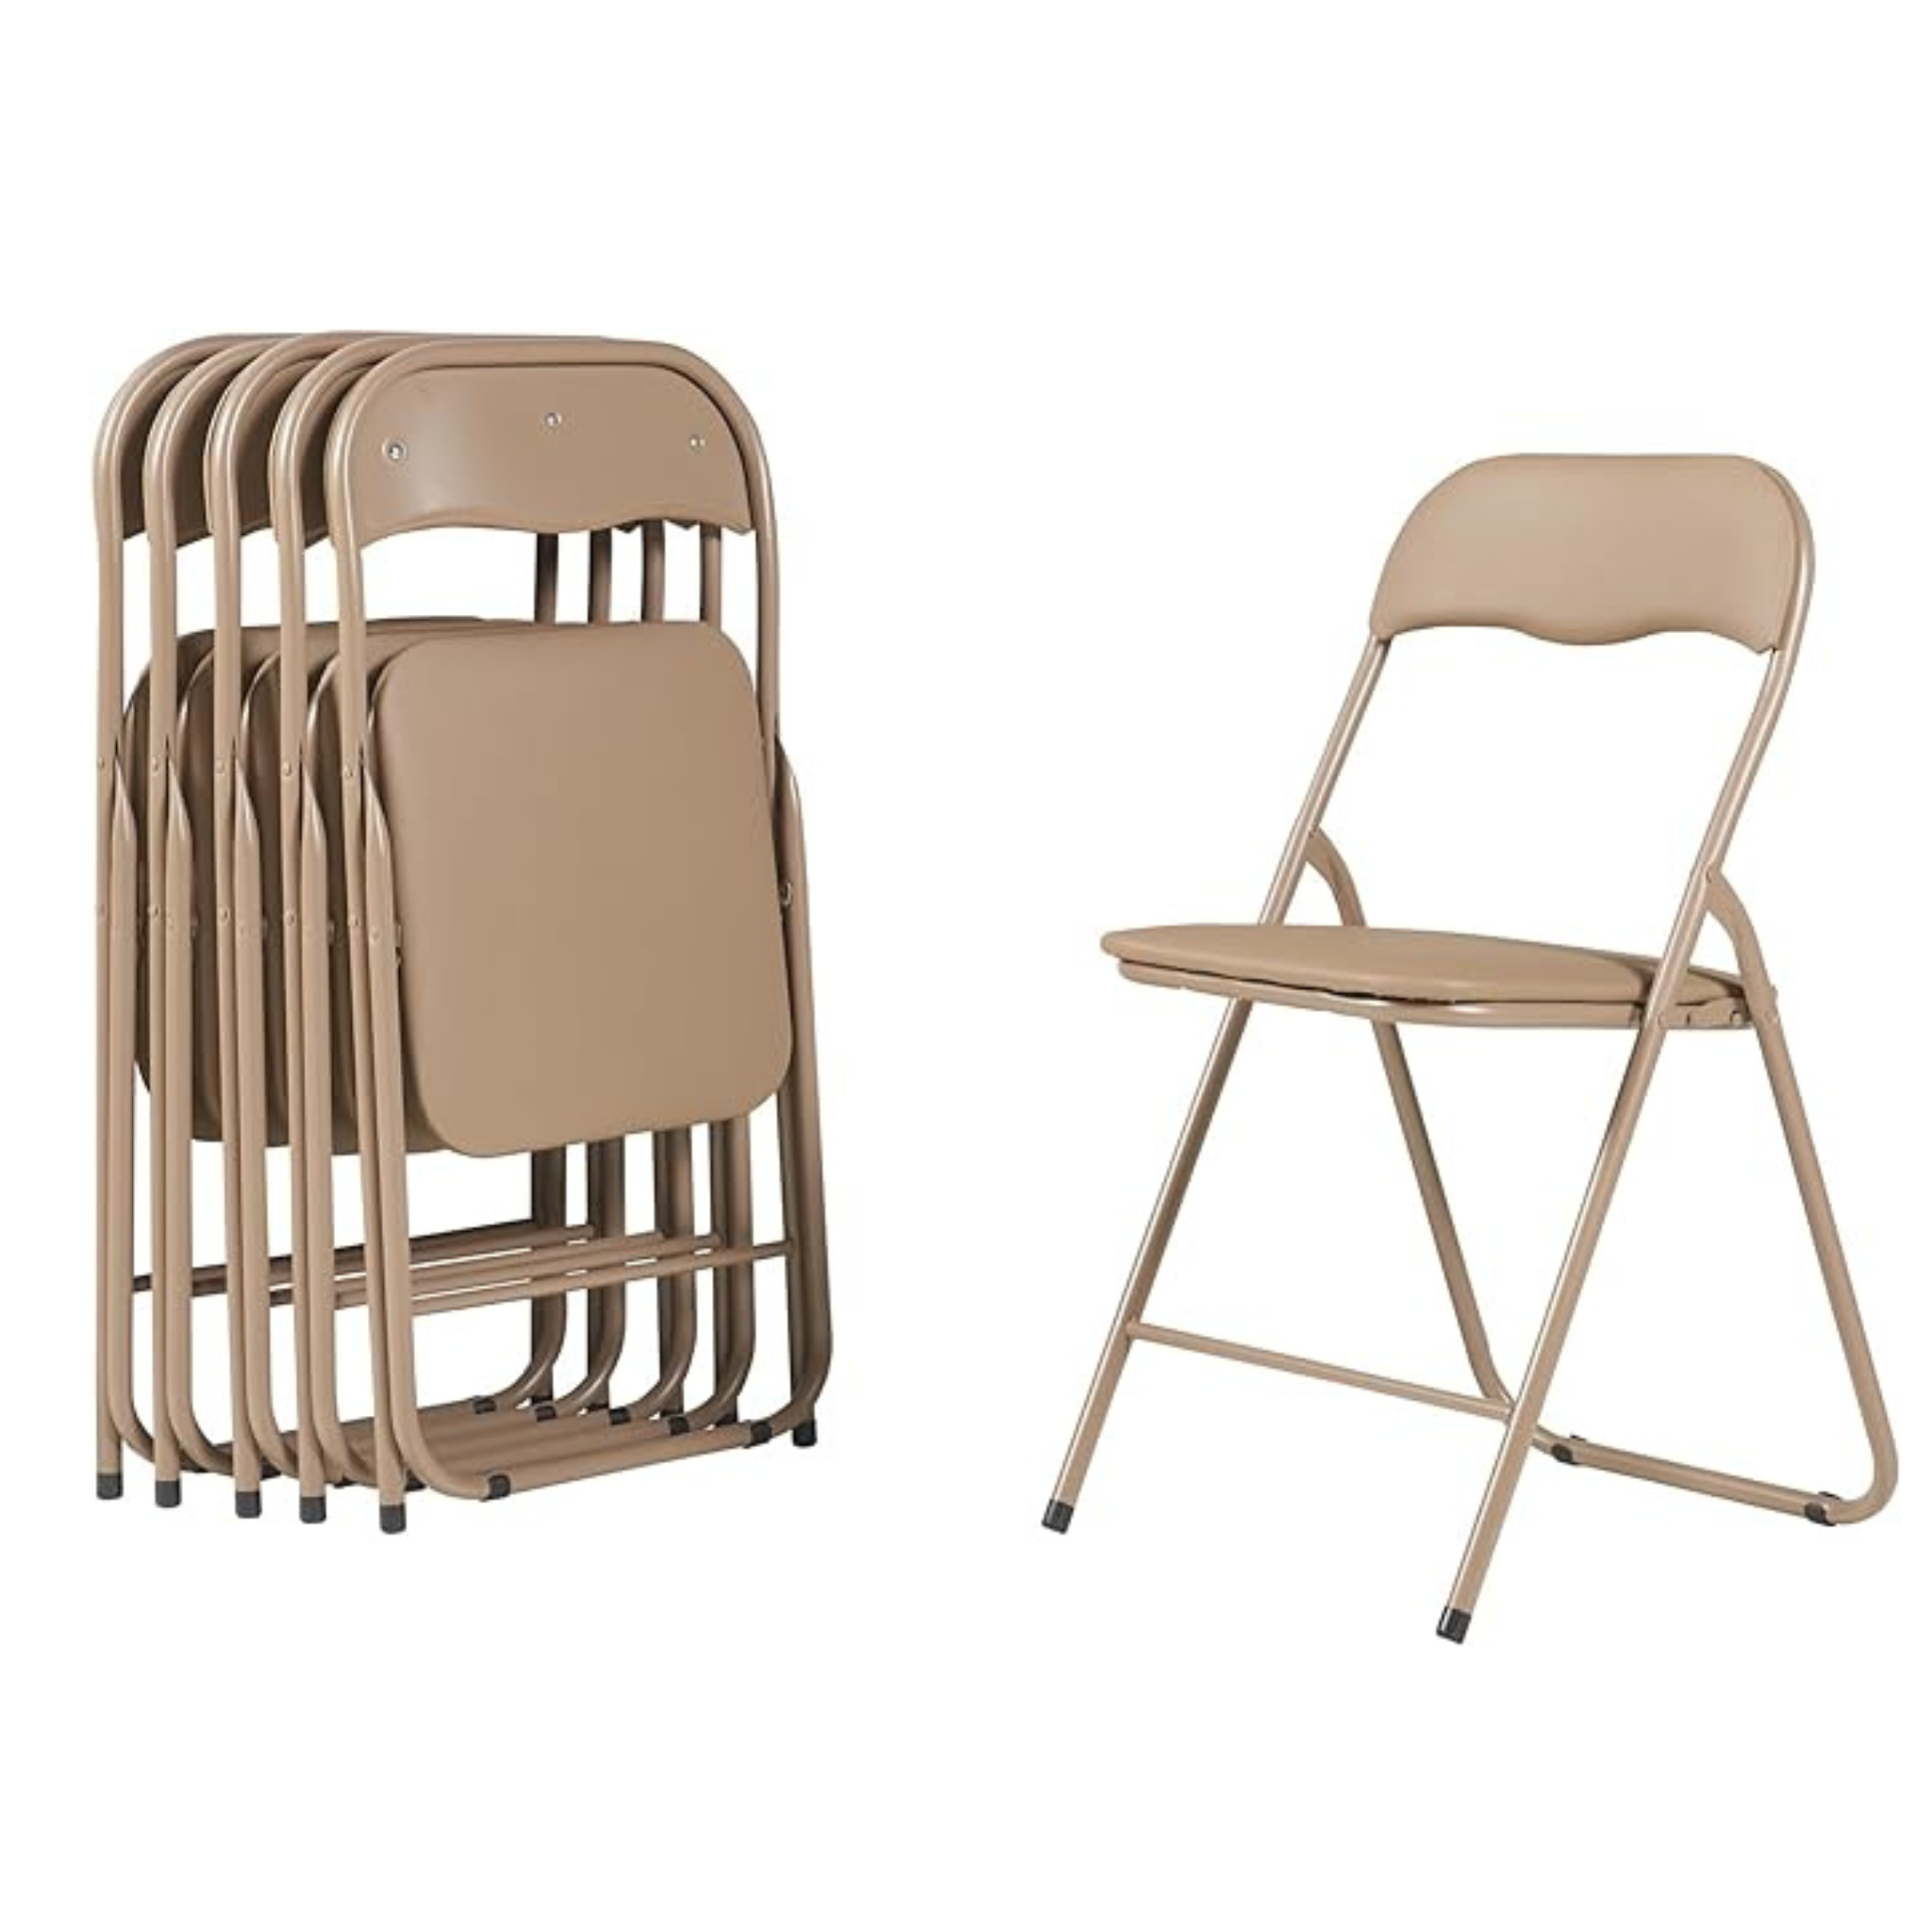 6 Pack Folding Chairs with Padded Cushion and Back